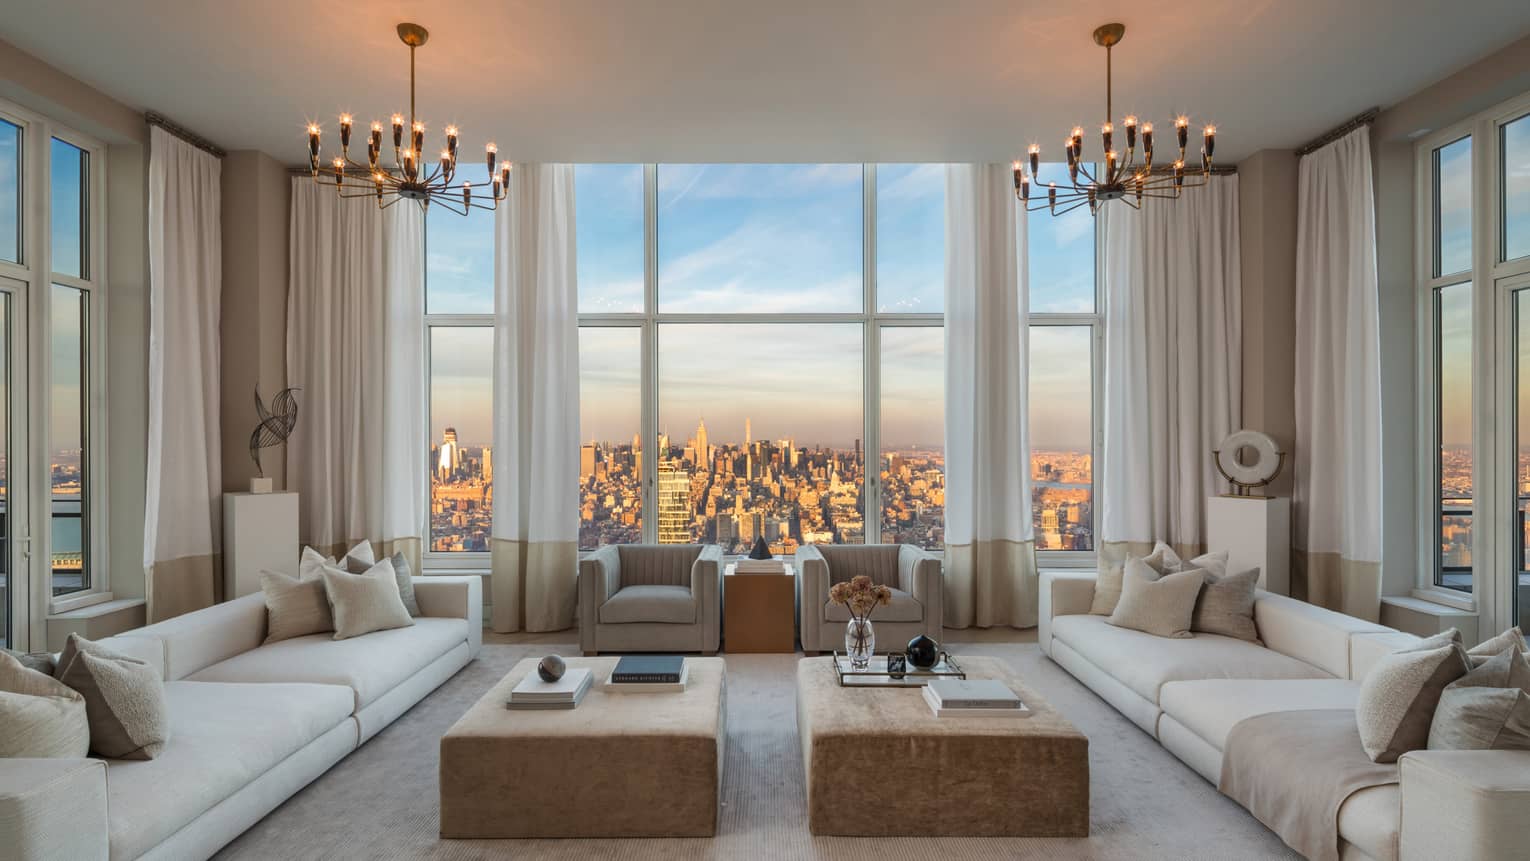 Living room with two long white sofas, armchairs around coffee tables, picture windows with city views